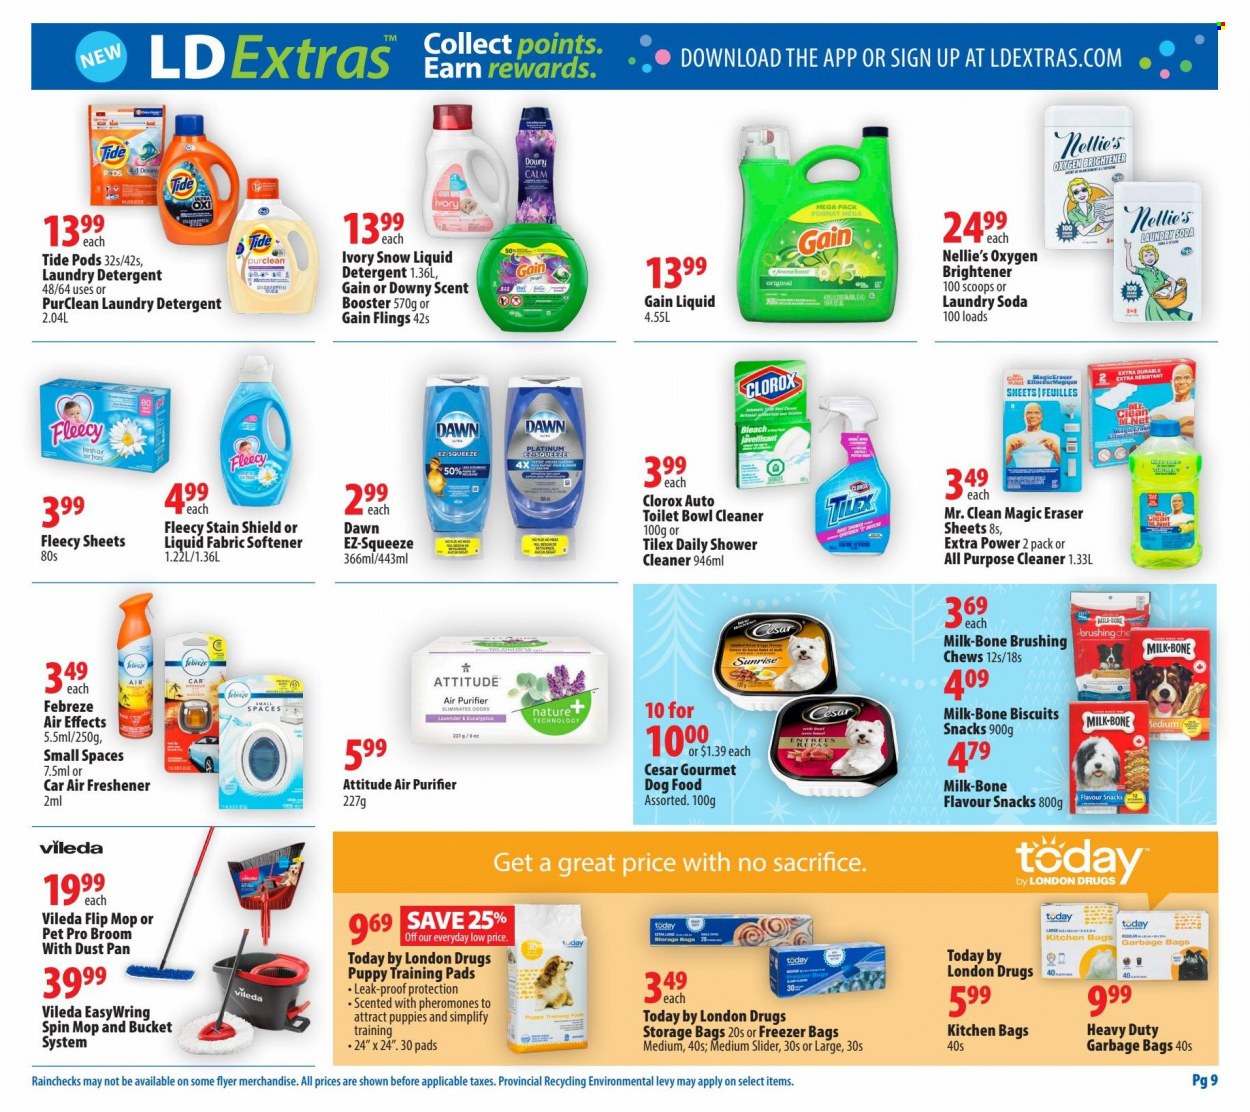 thumbnail - London Drugs Flyer - December 02, 2022 - December 07, 2022 - Sales products - chewing gum, biscuit, soda, Boost, Febreze, Gain, cleaner, bleach, all purpose cleaner, Clorox, Tide, fabric softener, liquid detergent, laundry detergent, Downy Laundry, bag, storage bag, Vileda, spin mop, mop, broom, freezer bag, eraser, air freshener, freezer, air purifier, detergent. Page 9.